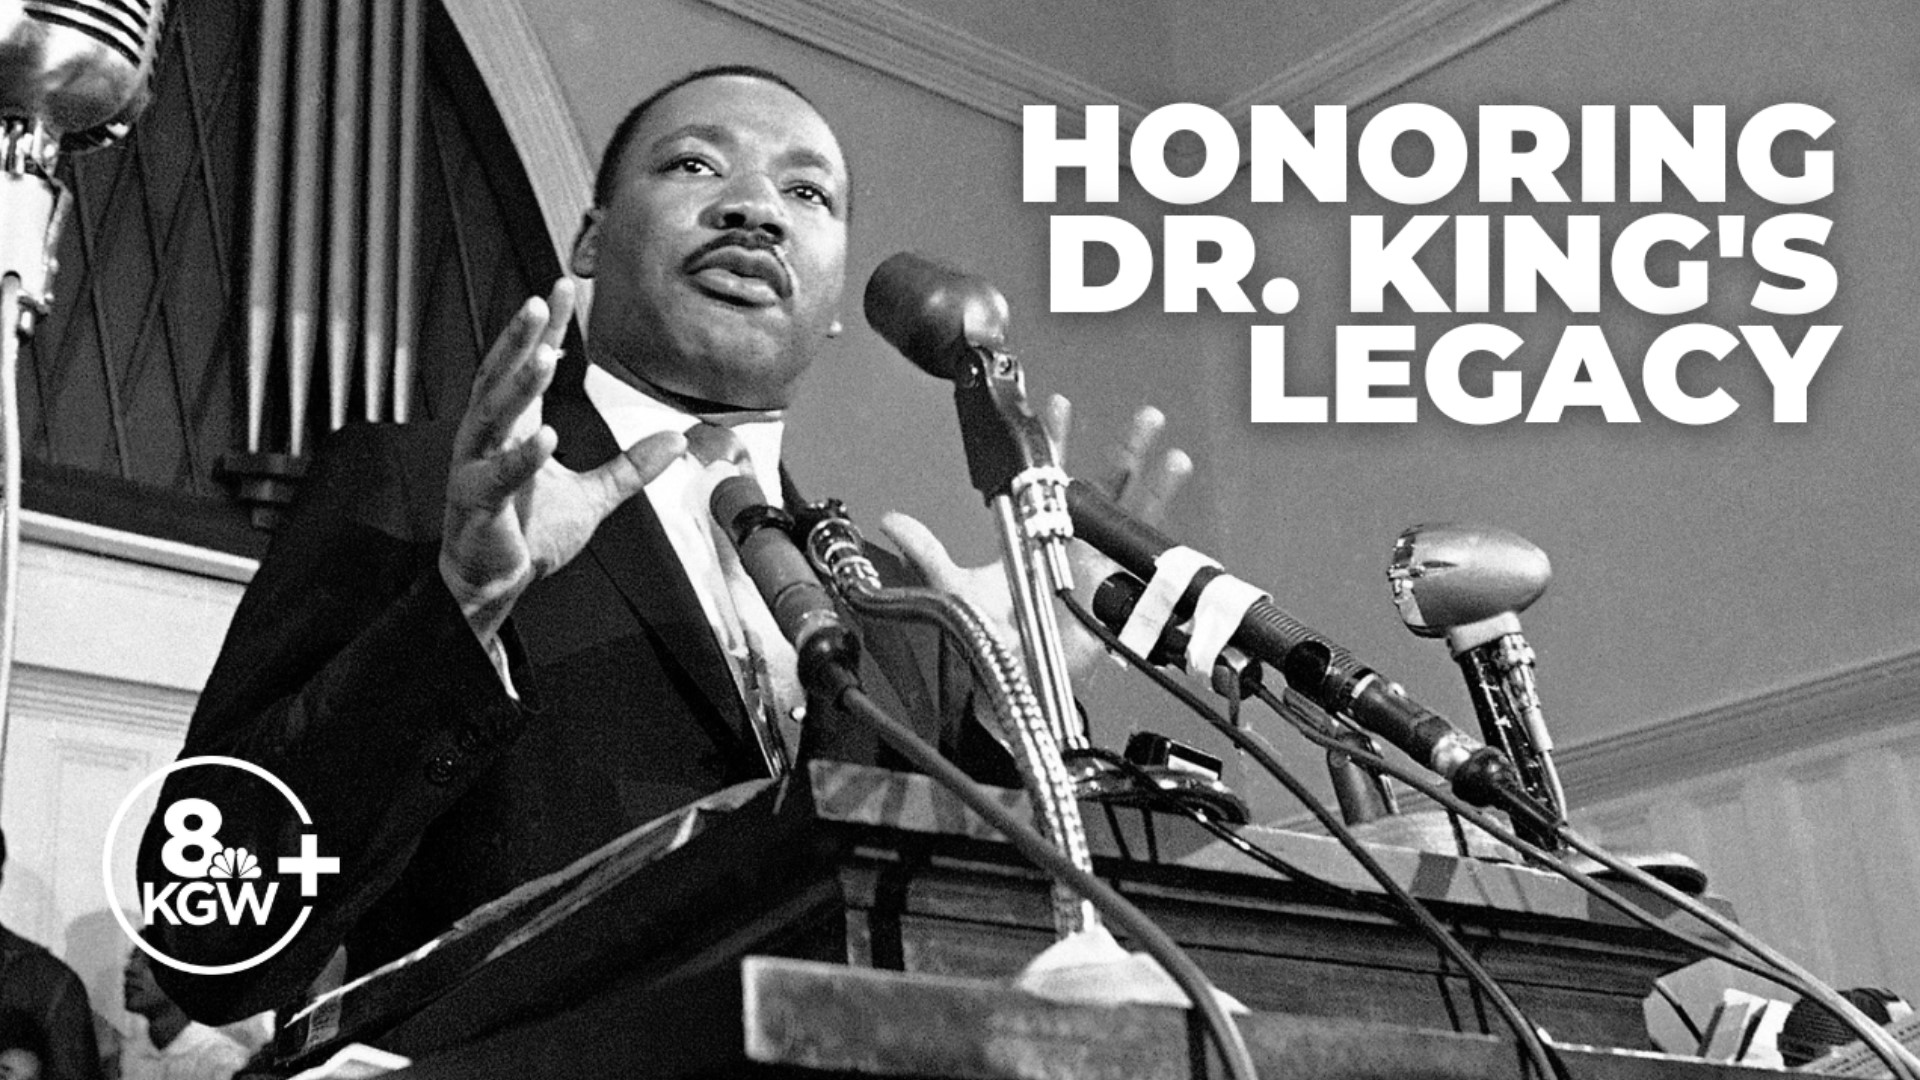 The third Monday in January honors Dr. Martin Luther King Junior. It's considered a day of service where many volunteer to give back and improve their communities.